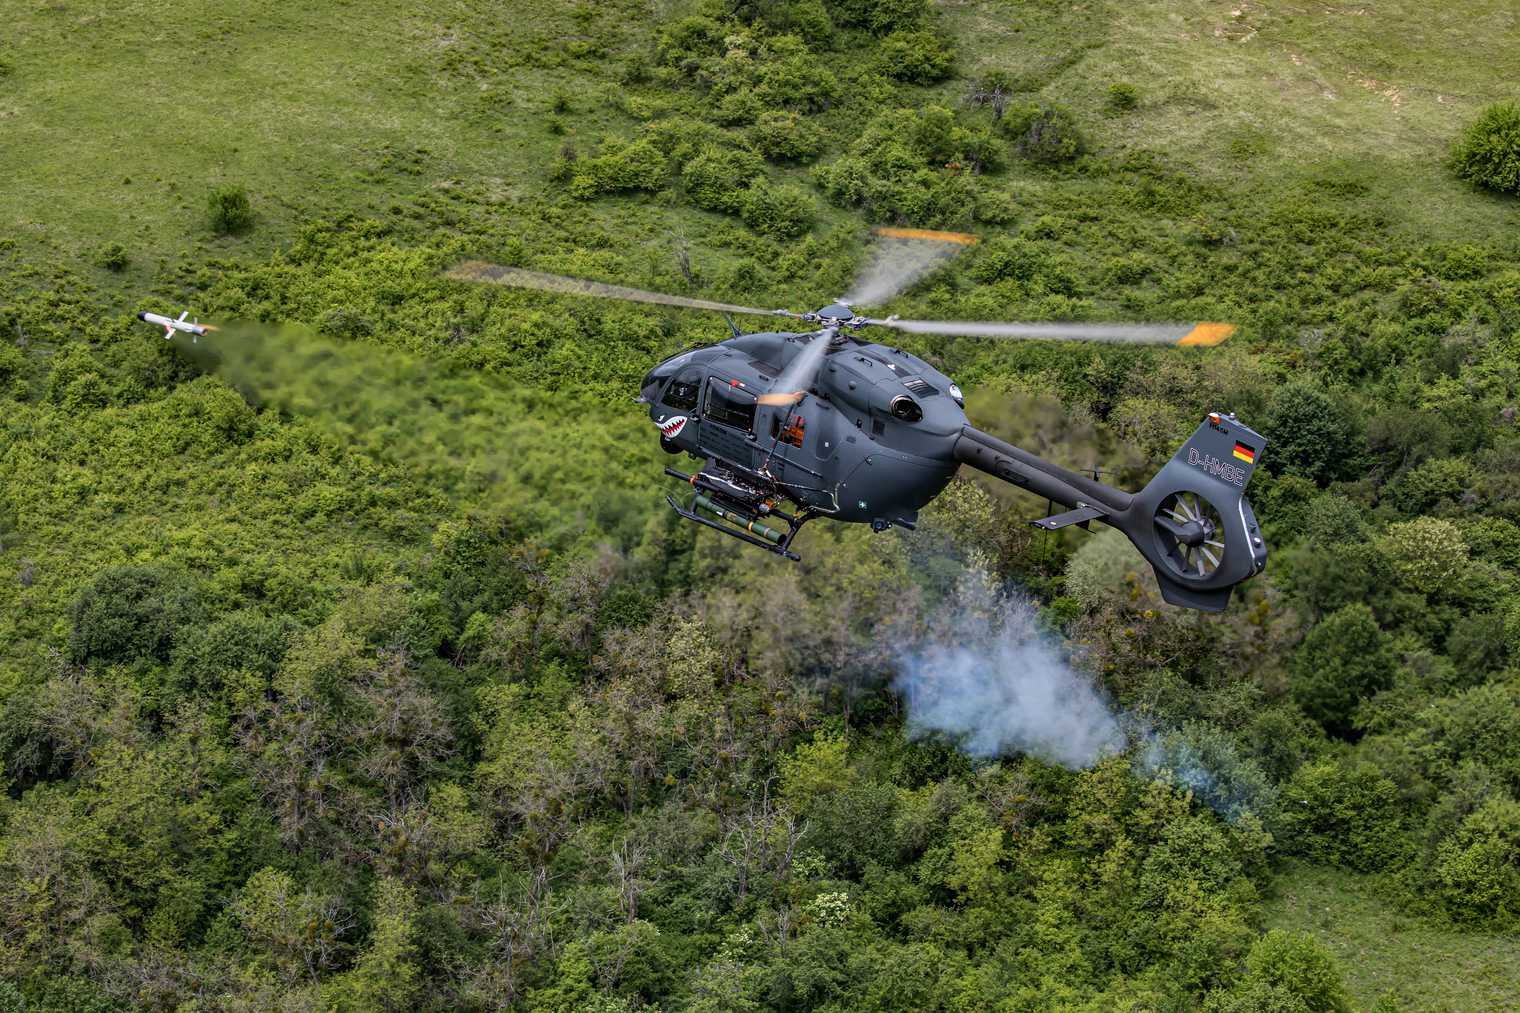 Airbus H145M Helicopter Successfully Fires Rafael Spike ER2 Anti-tank Guided Missile